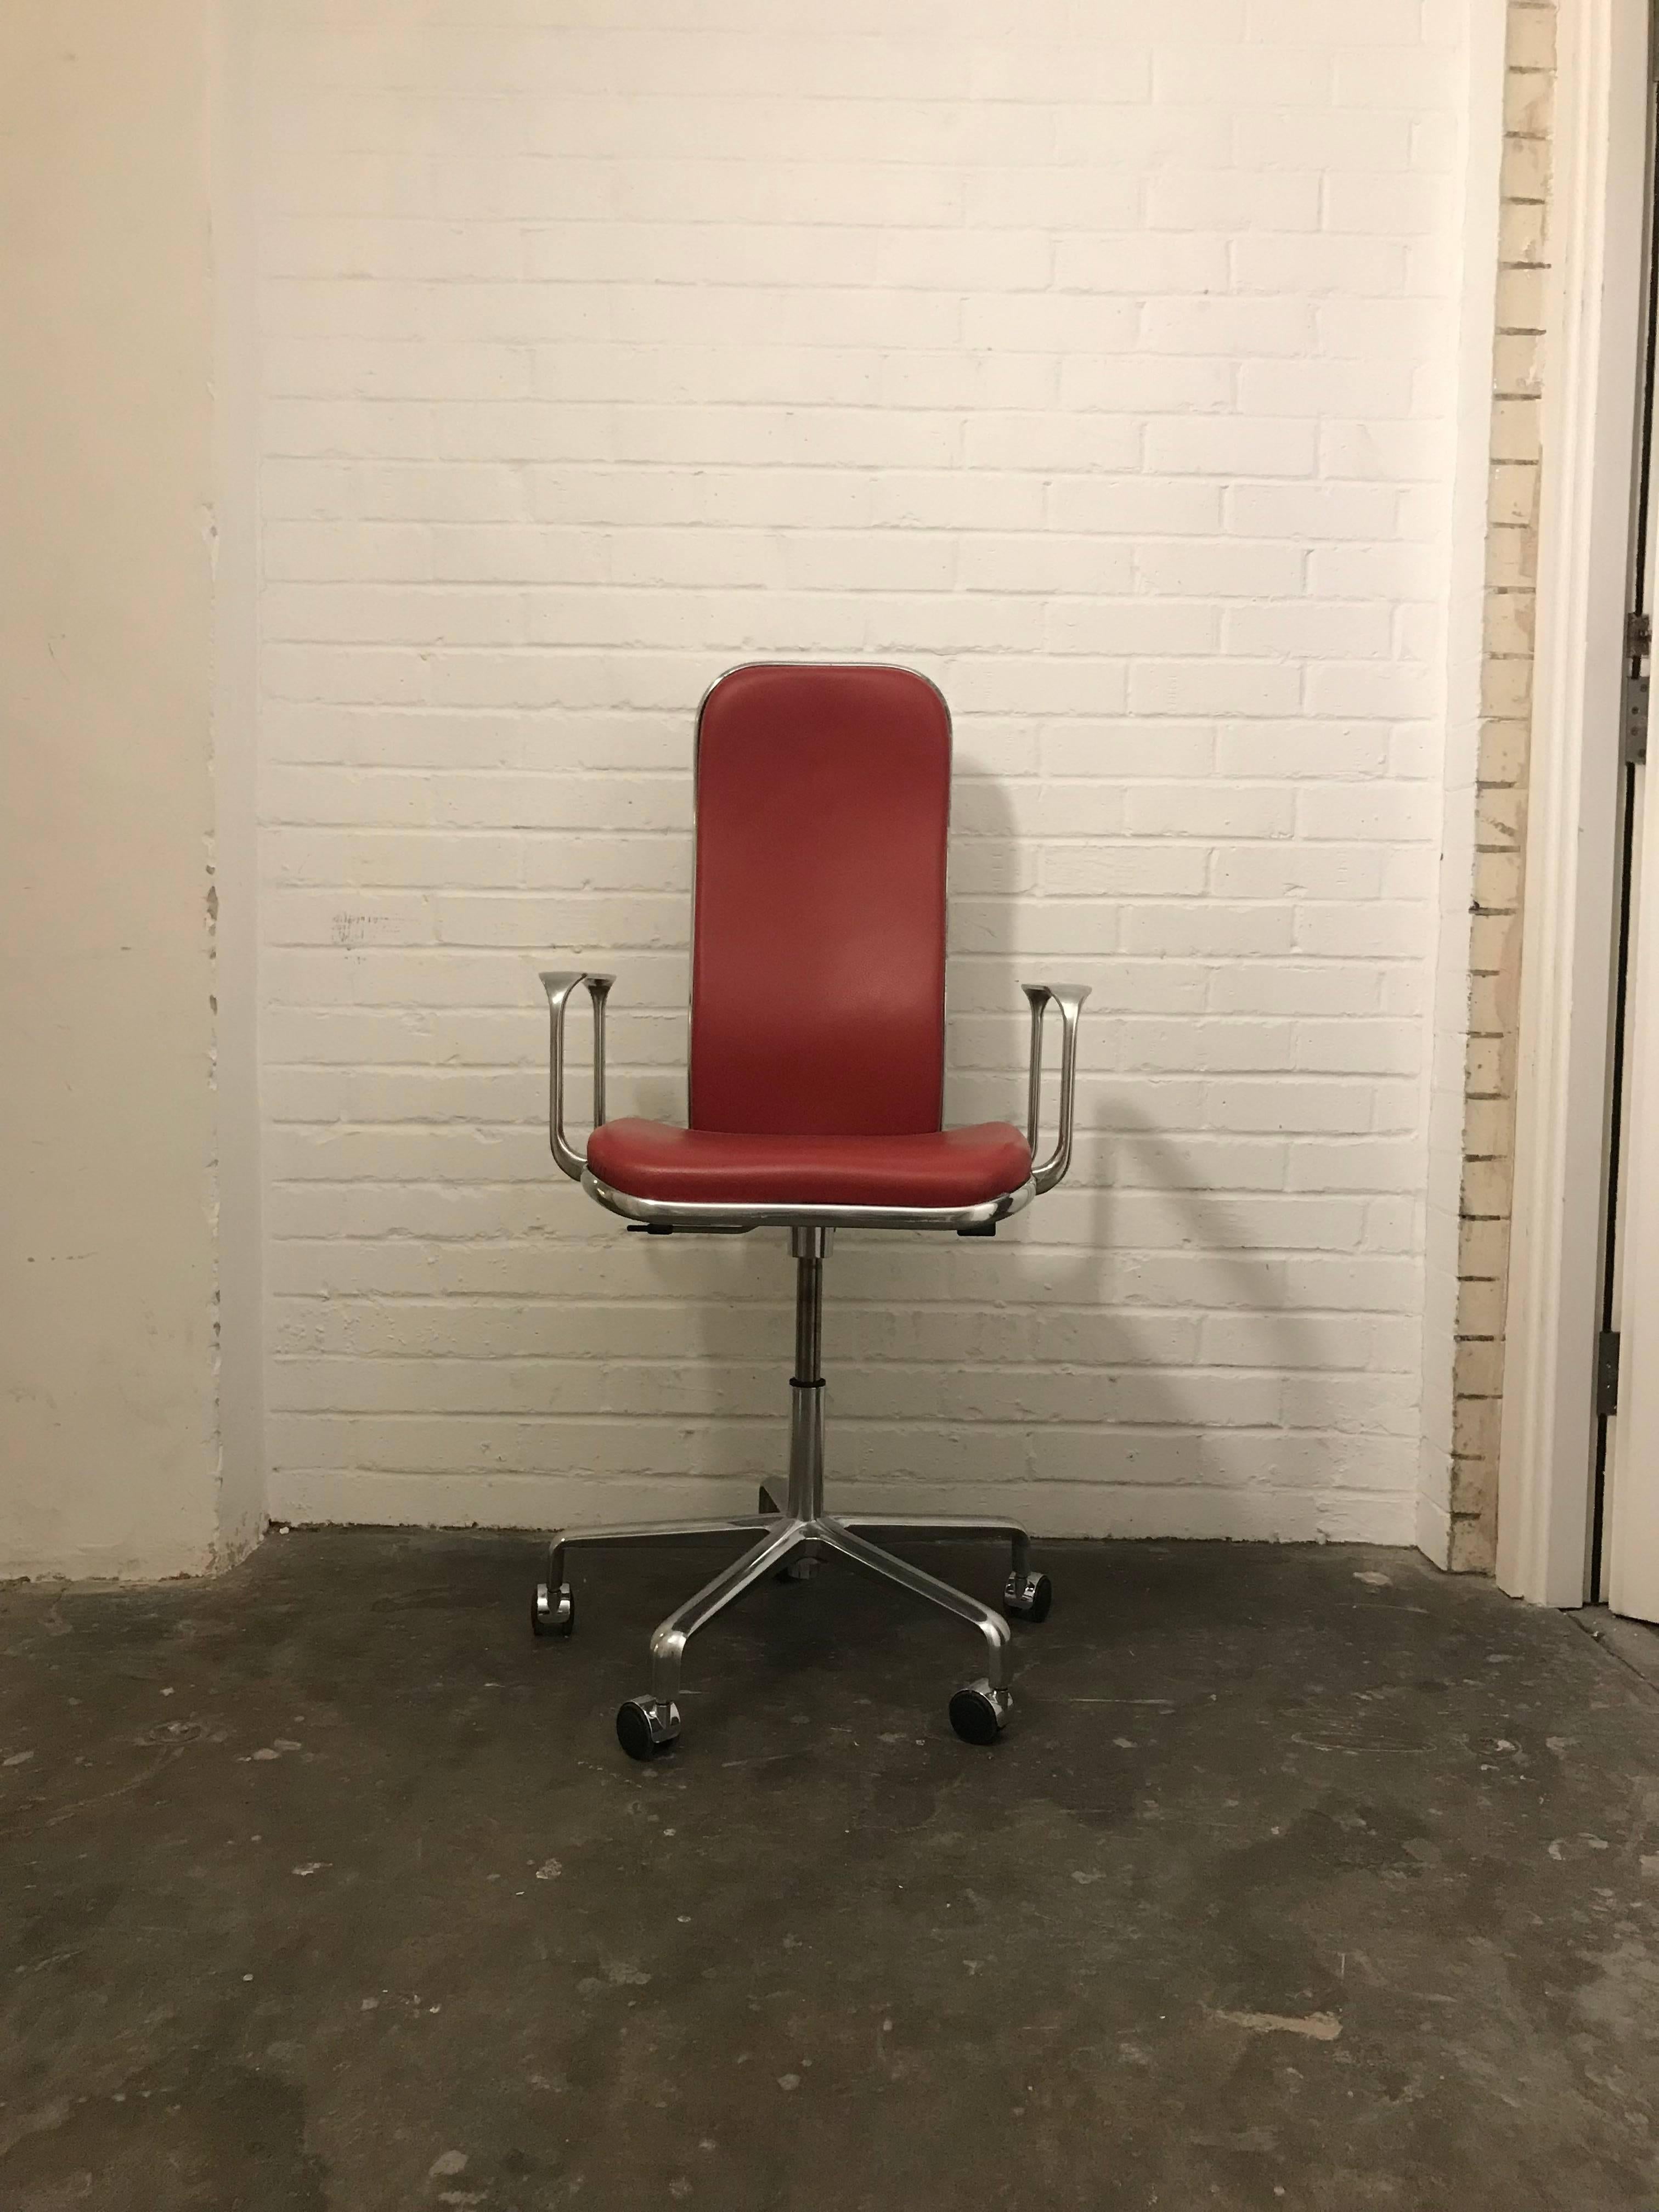 Desk chair. The height as well as the seat back are adjustable. The chair has traces of wear like the chrome has become dull at places and the leather shows a bit age, but the chair is still a beautiful piece.
The max height is 111 cm and the seat